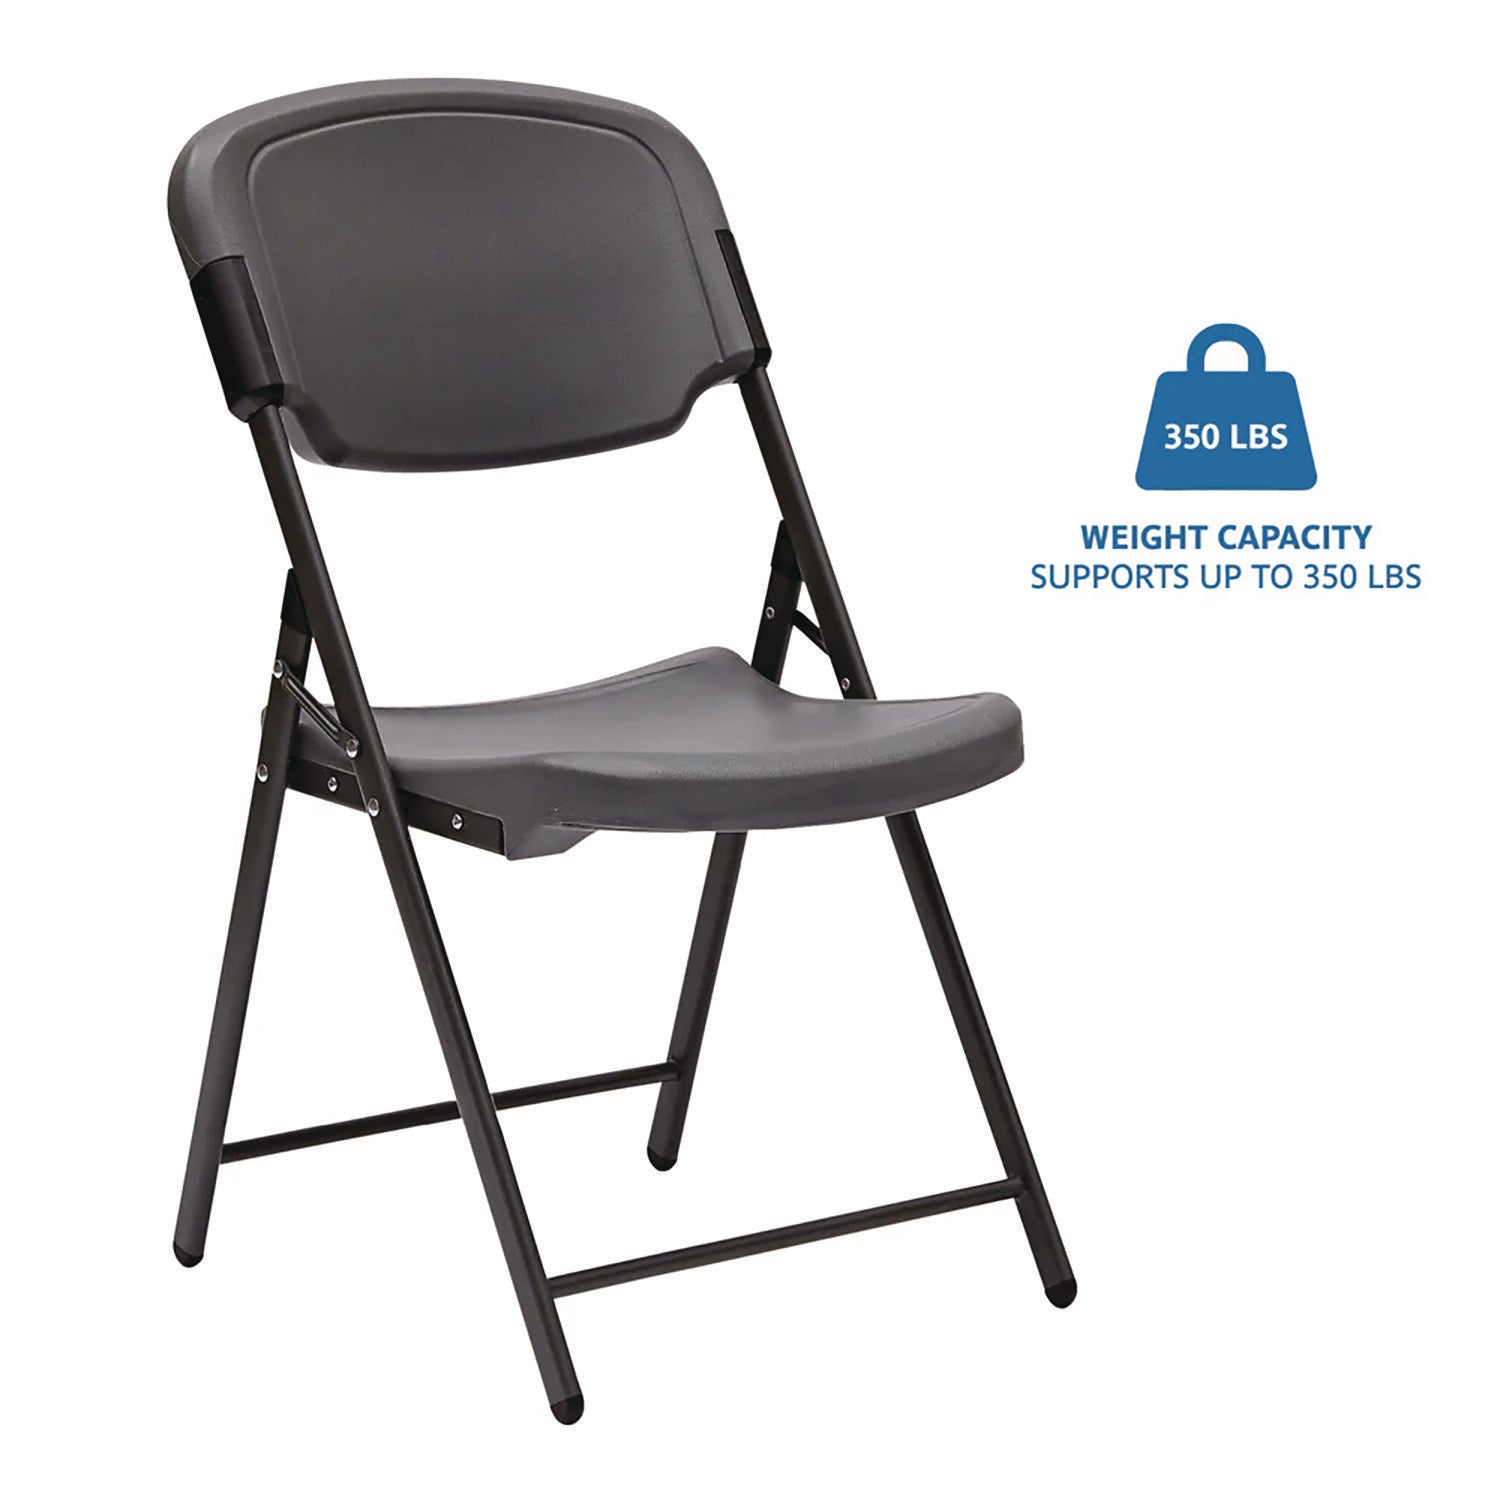 Rough n Ready Commercial Folding Chair, Supports Up to 350 lb, 15.25" Seat Height, Charcoal Seat, Charcoal Back, Silver Base - 4